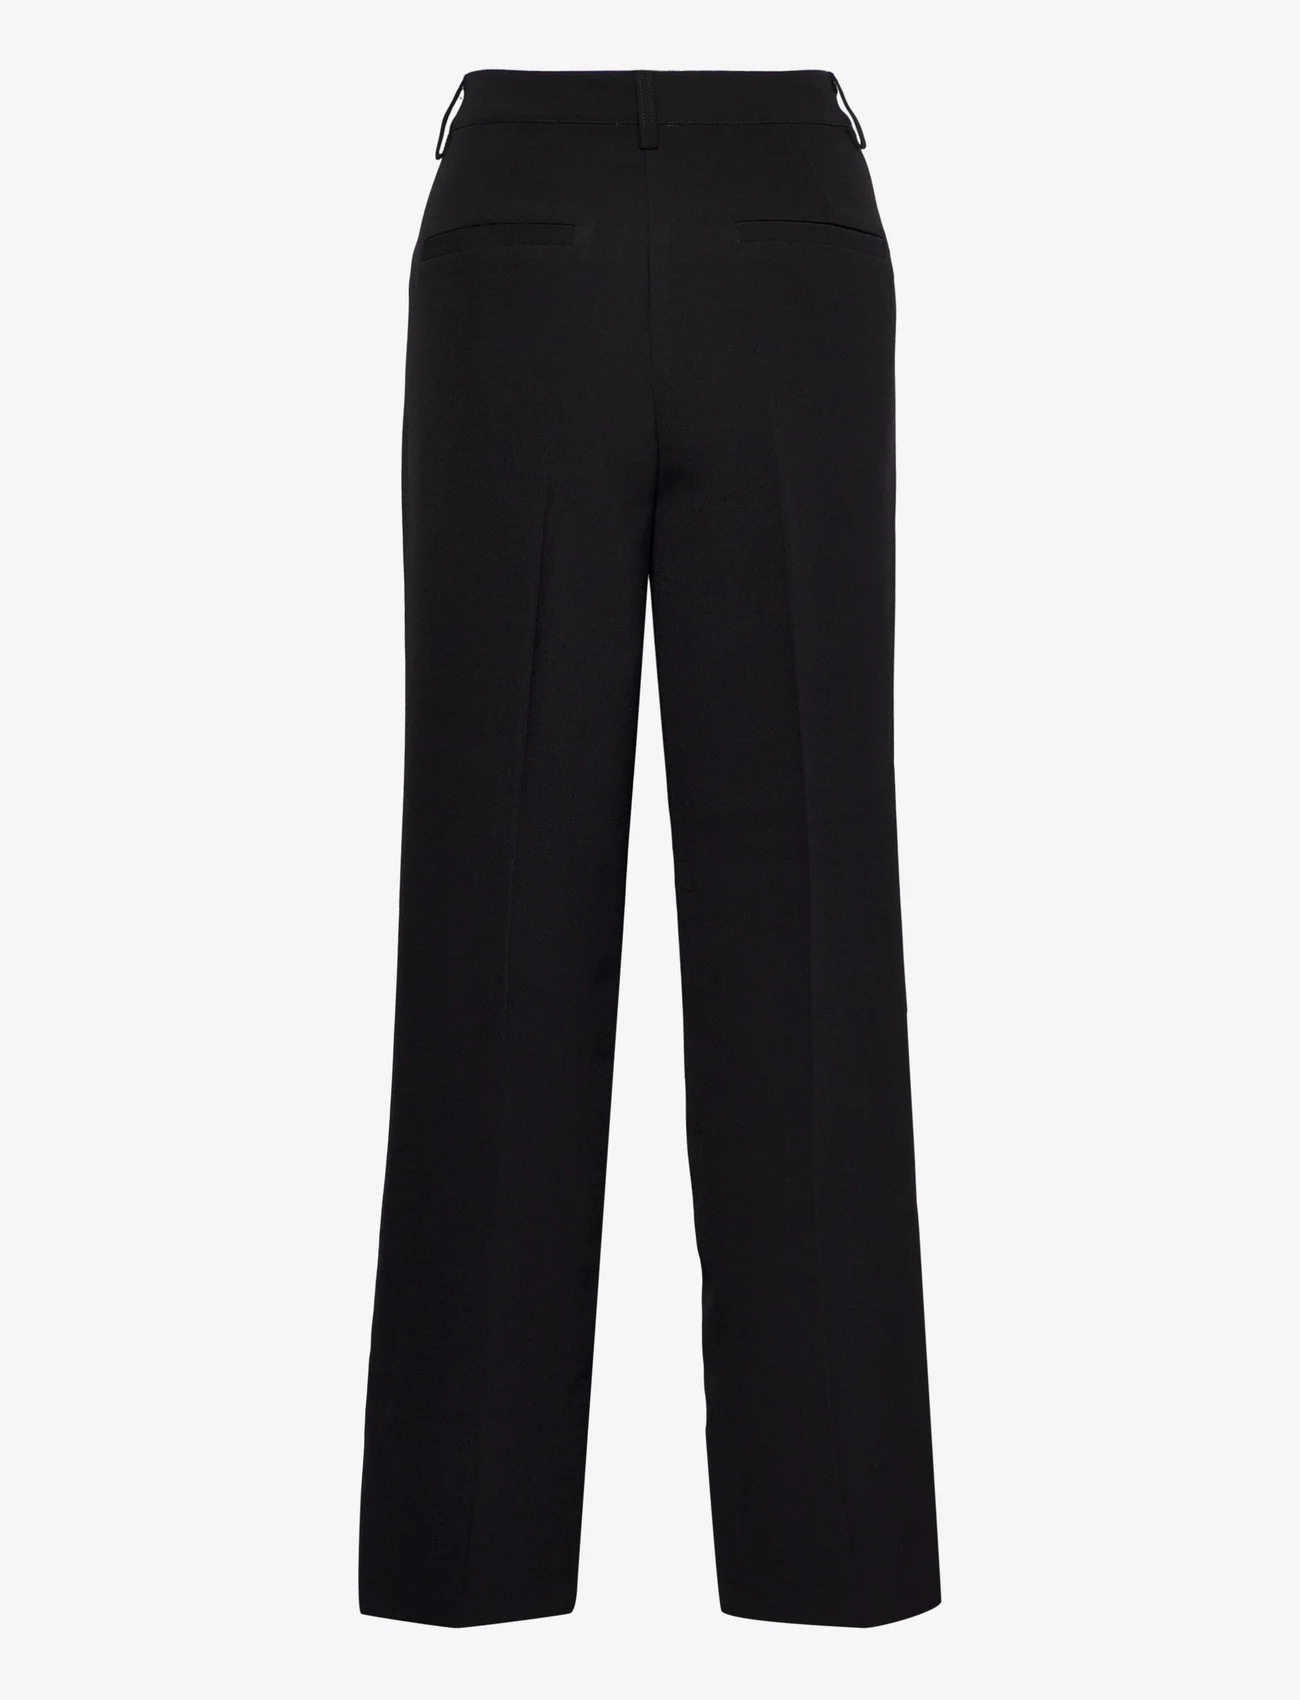 My Essential Wardrobe - 29 THE TAILORED PANT - kostymbyxor - black - 1